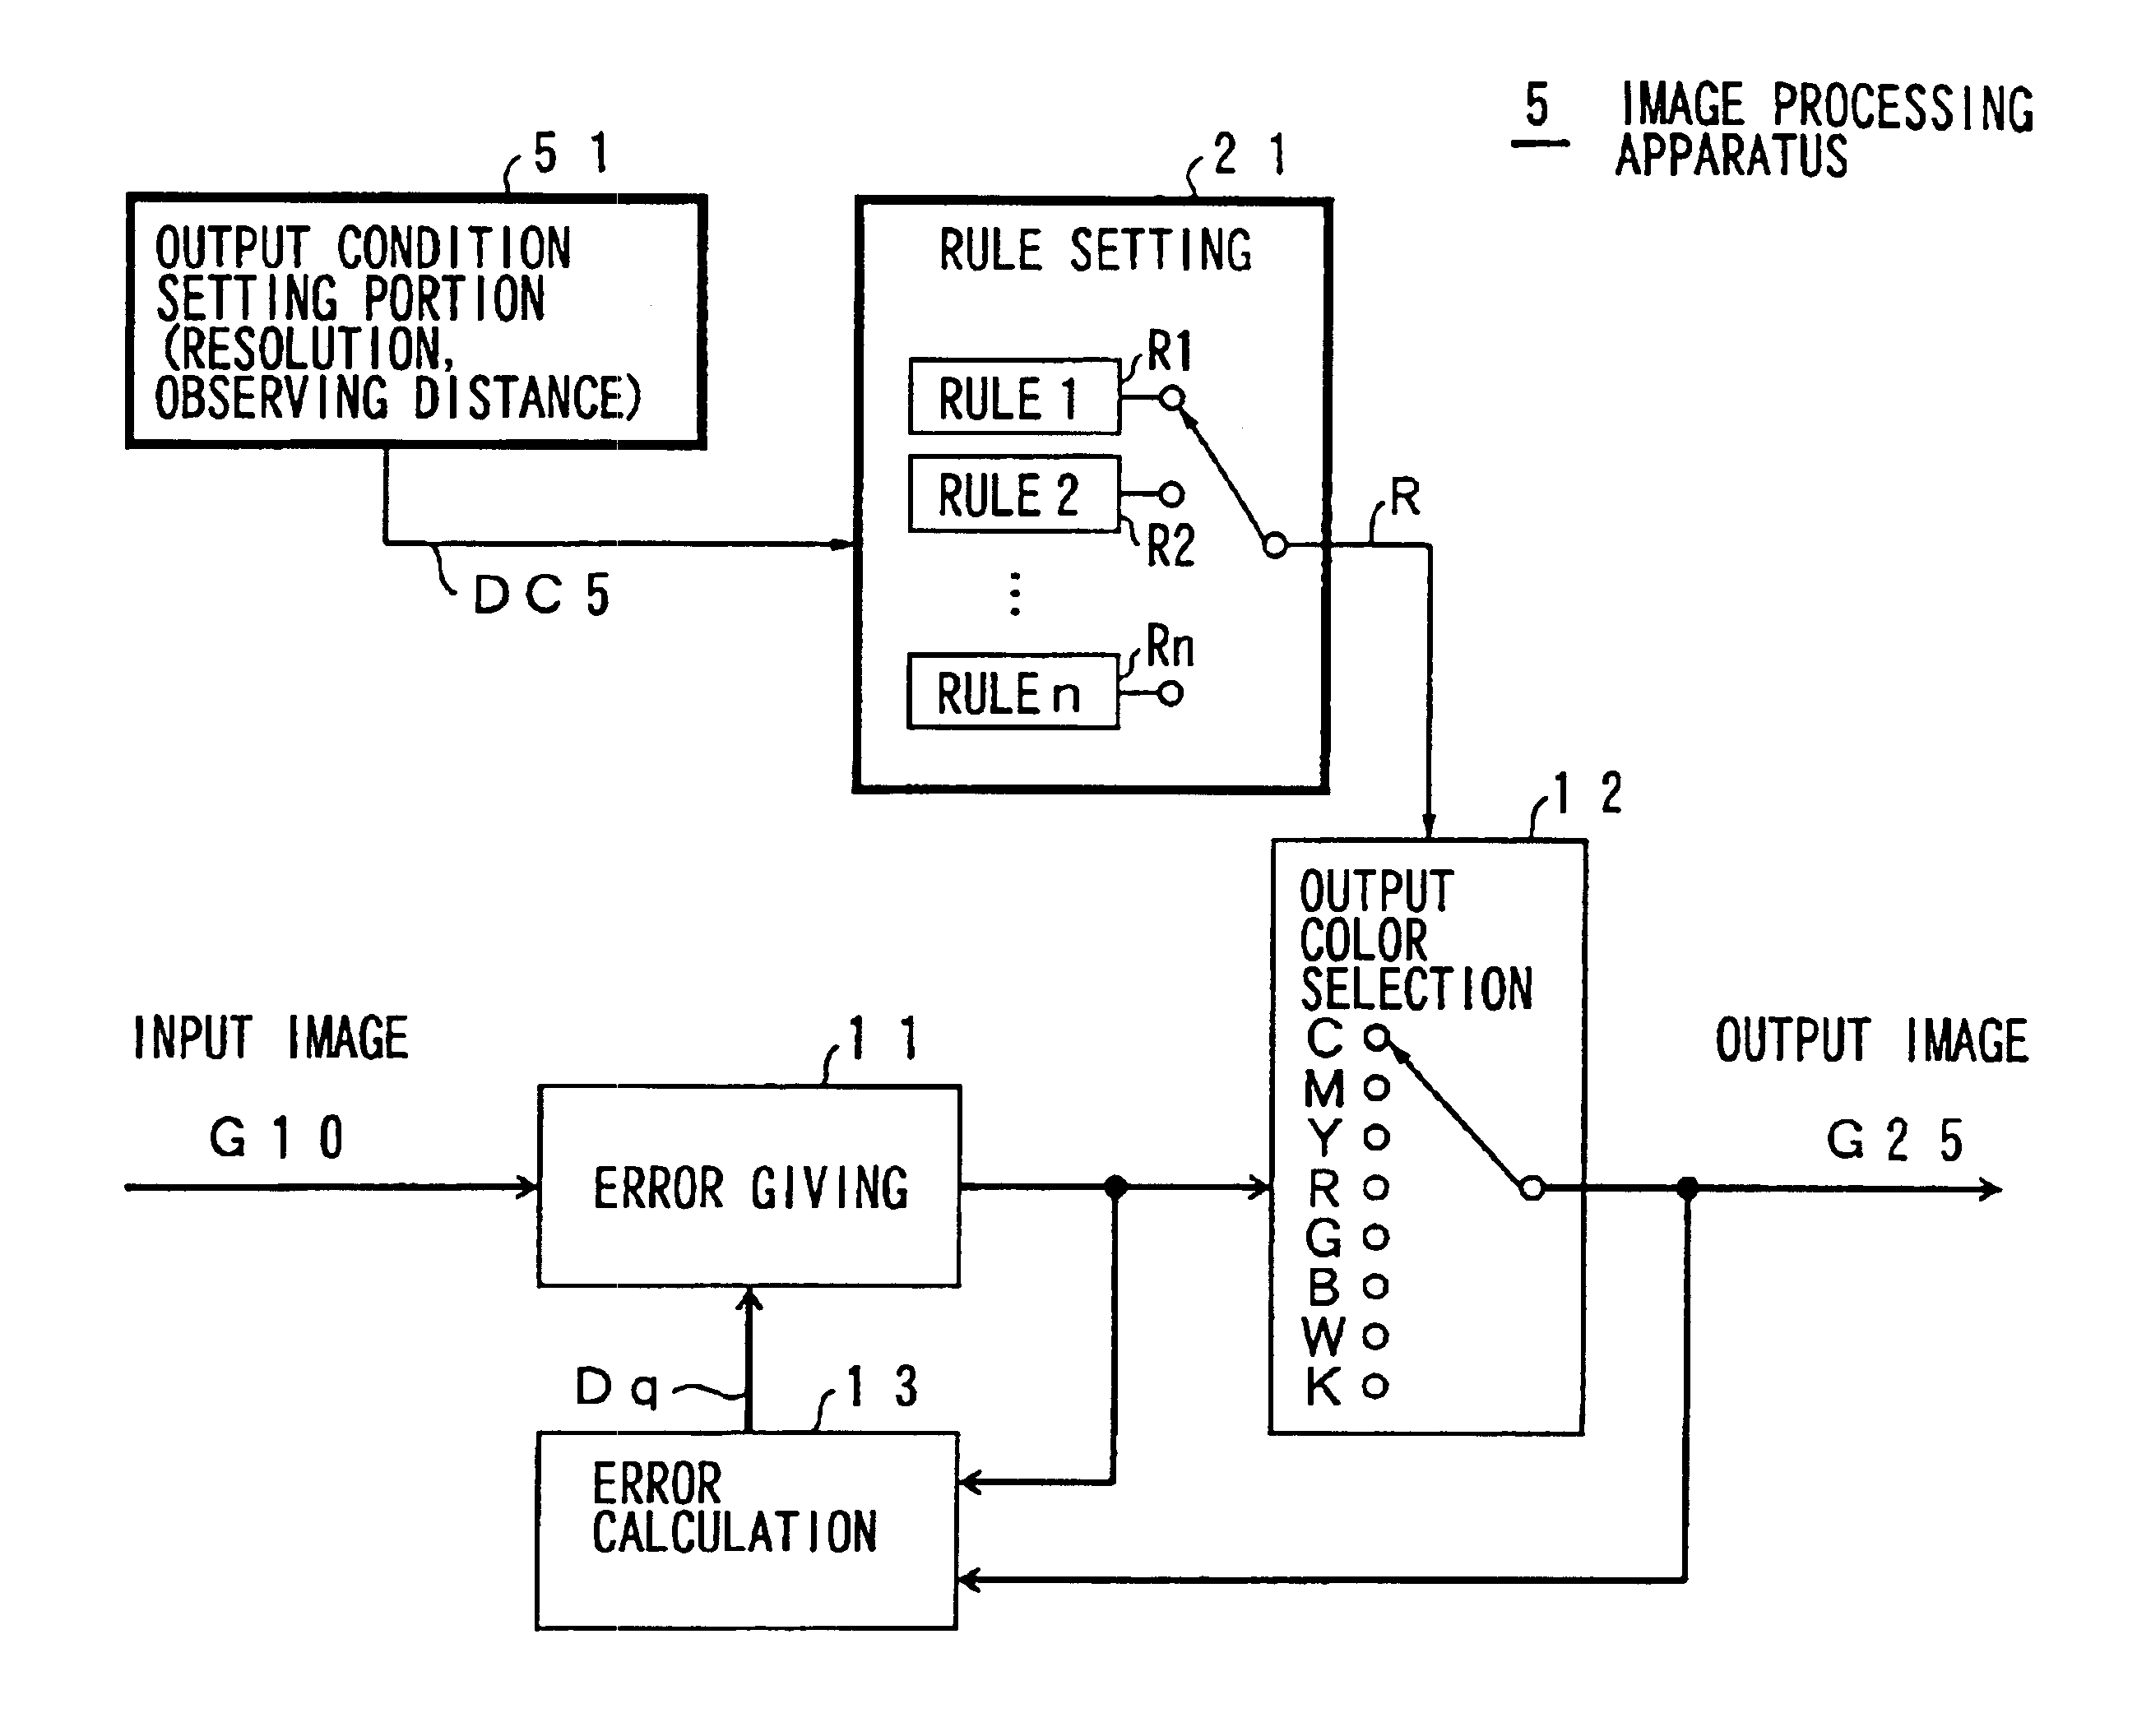 Method and apparatus for converting number of colors and processing image data